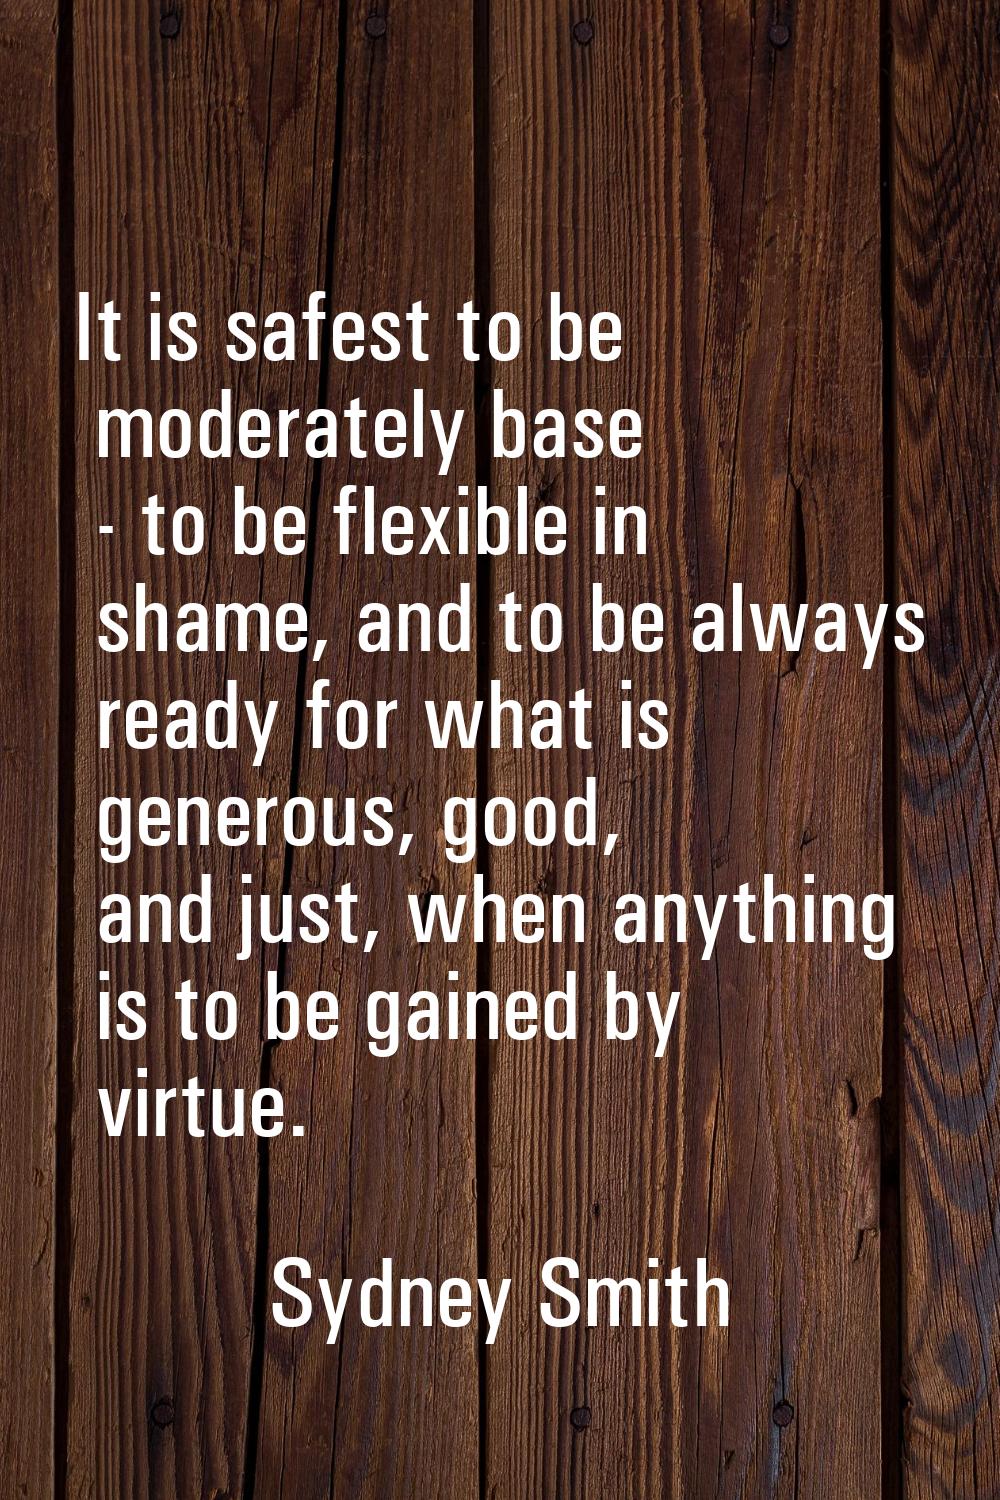 It is safest to be moderately base - to be flexible in shame, and to be always ready for what is ge